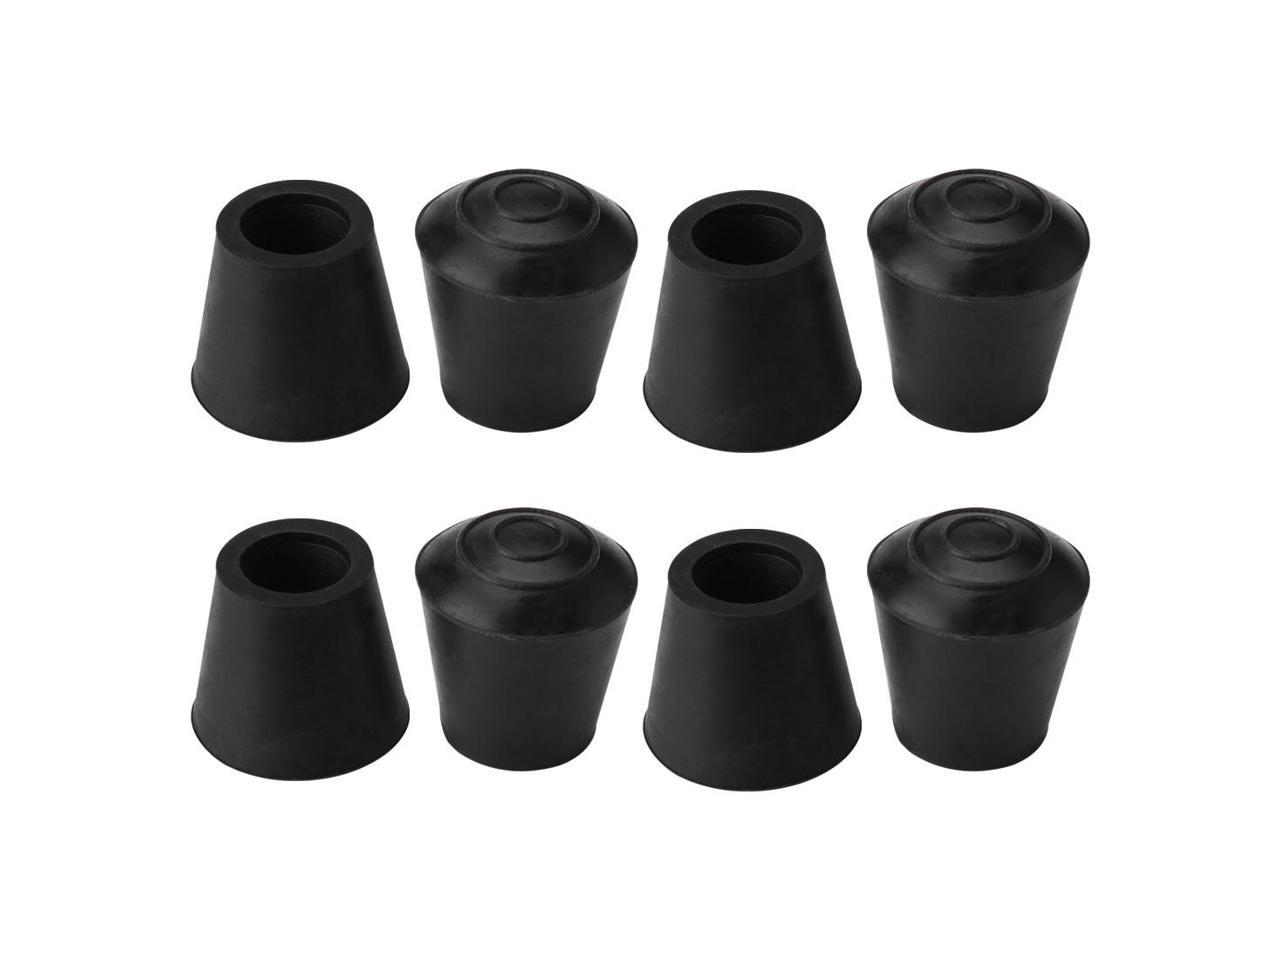 uxcell 8 Pcs Chair Table Leg Plastic Cap Round Tube Insert Fit 42mm Pipe Outer Dia 